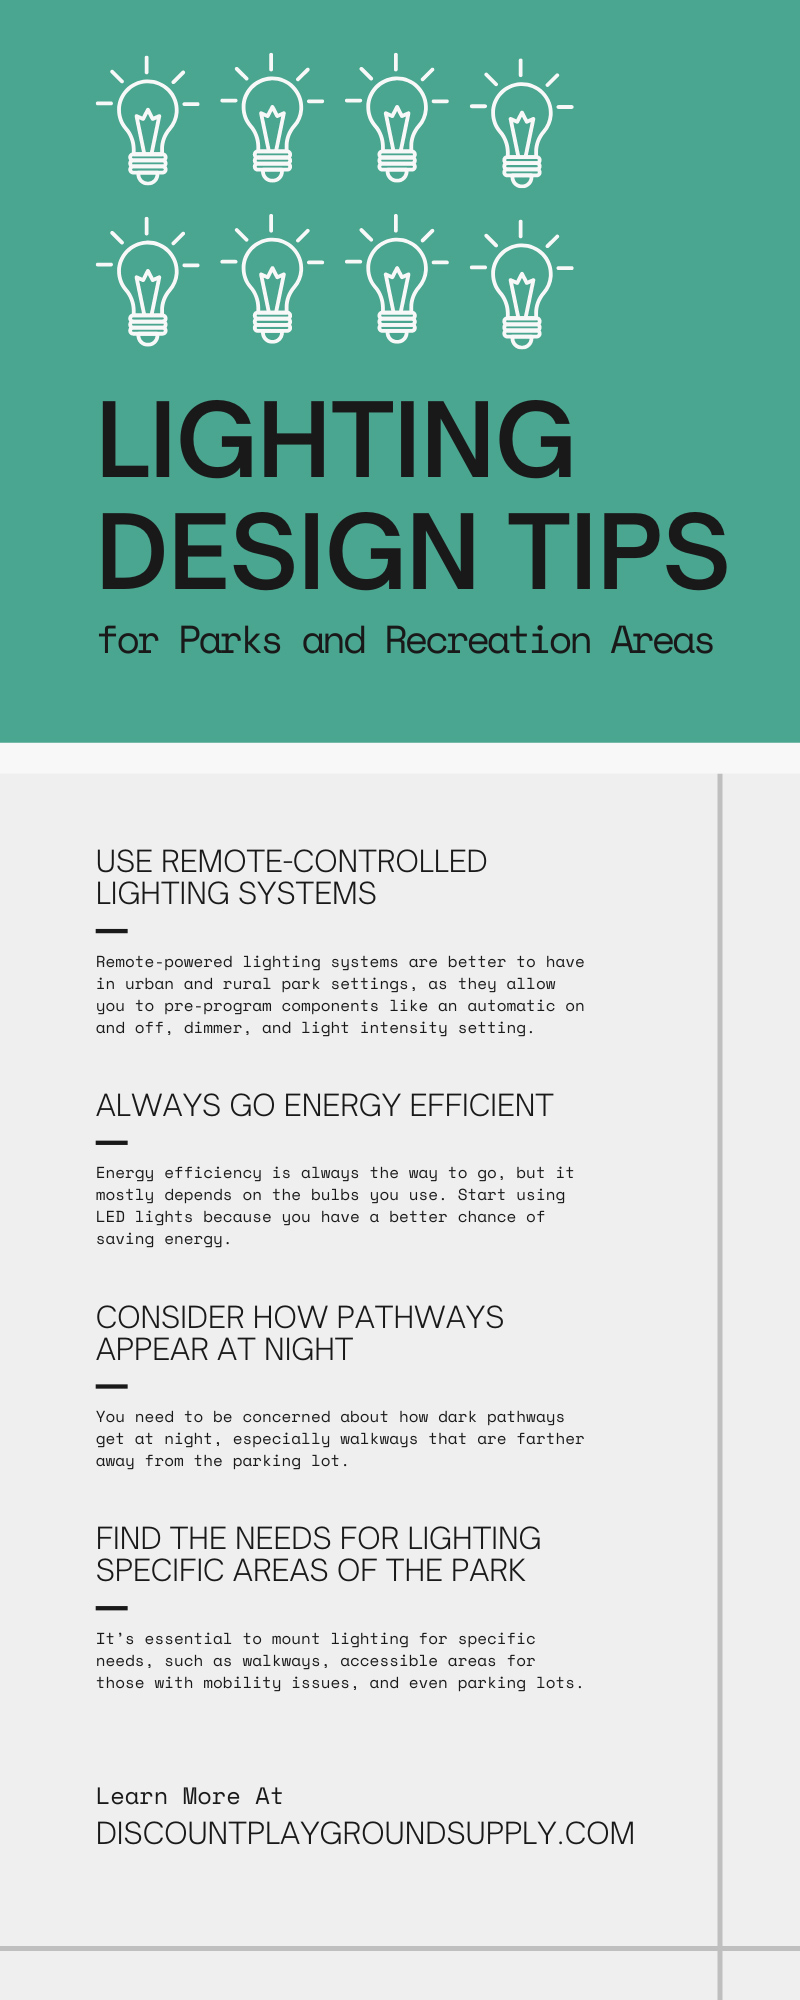 Lighting Design Tips for Parks and Recreation Areas